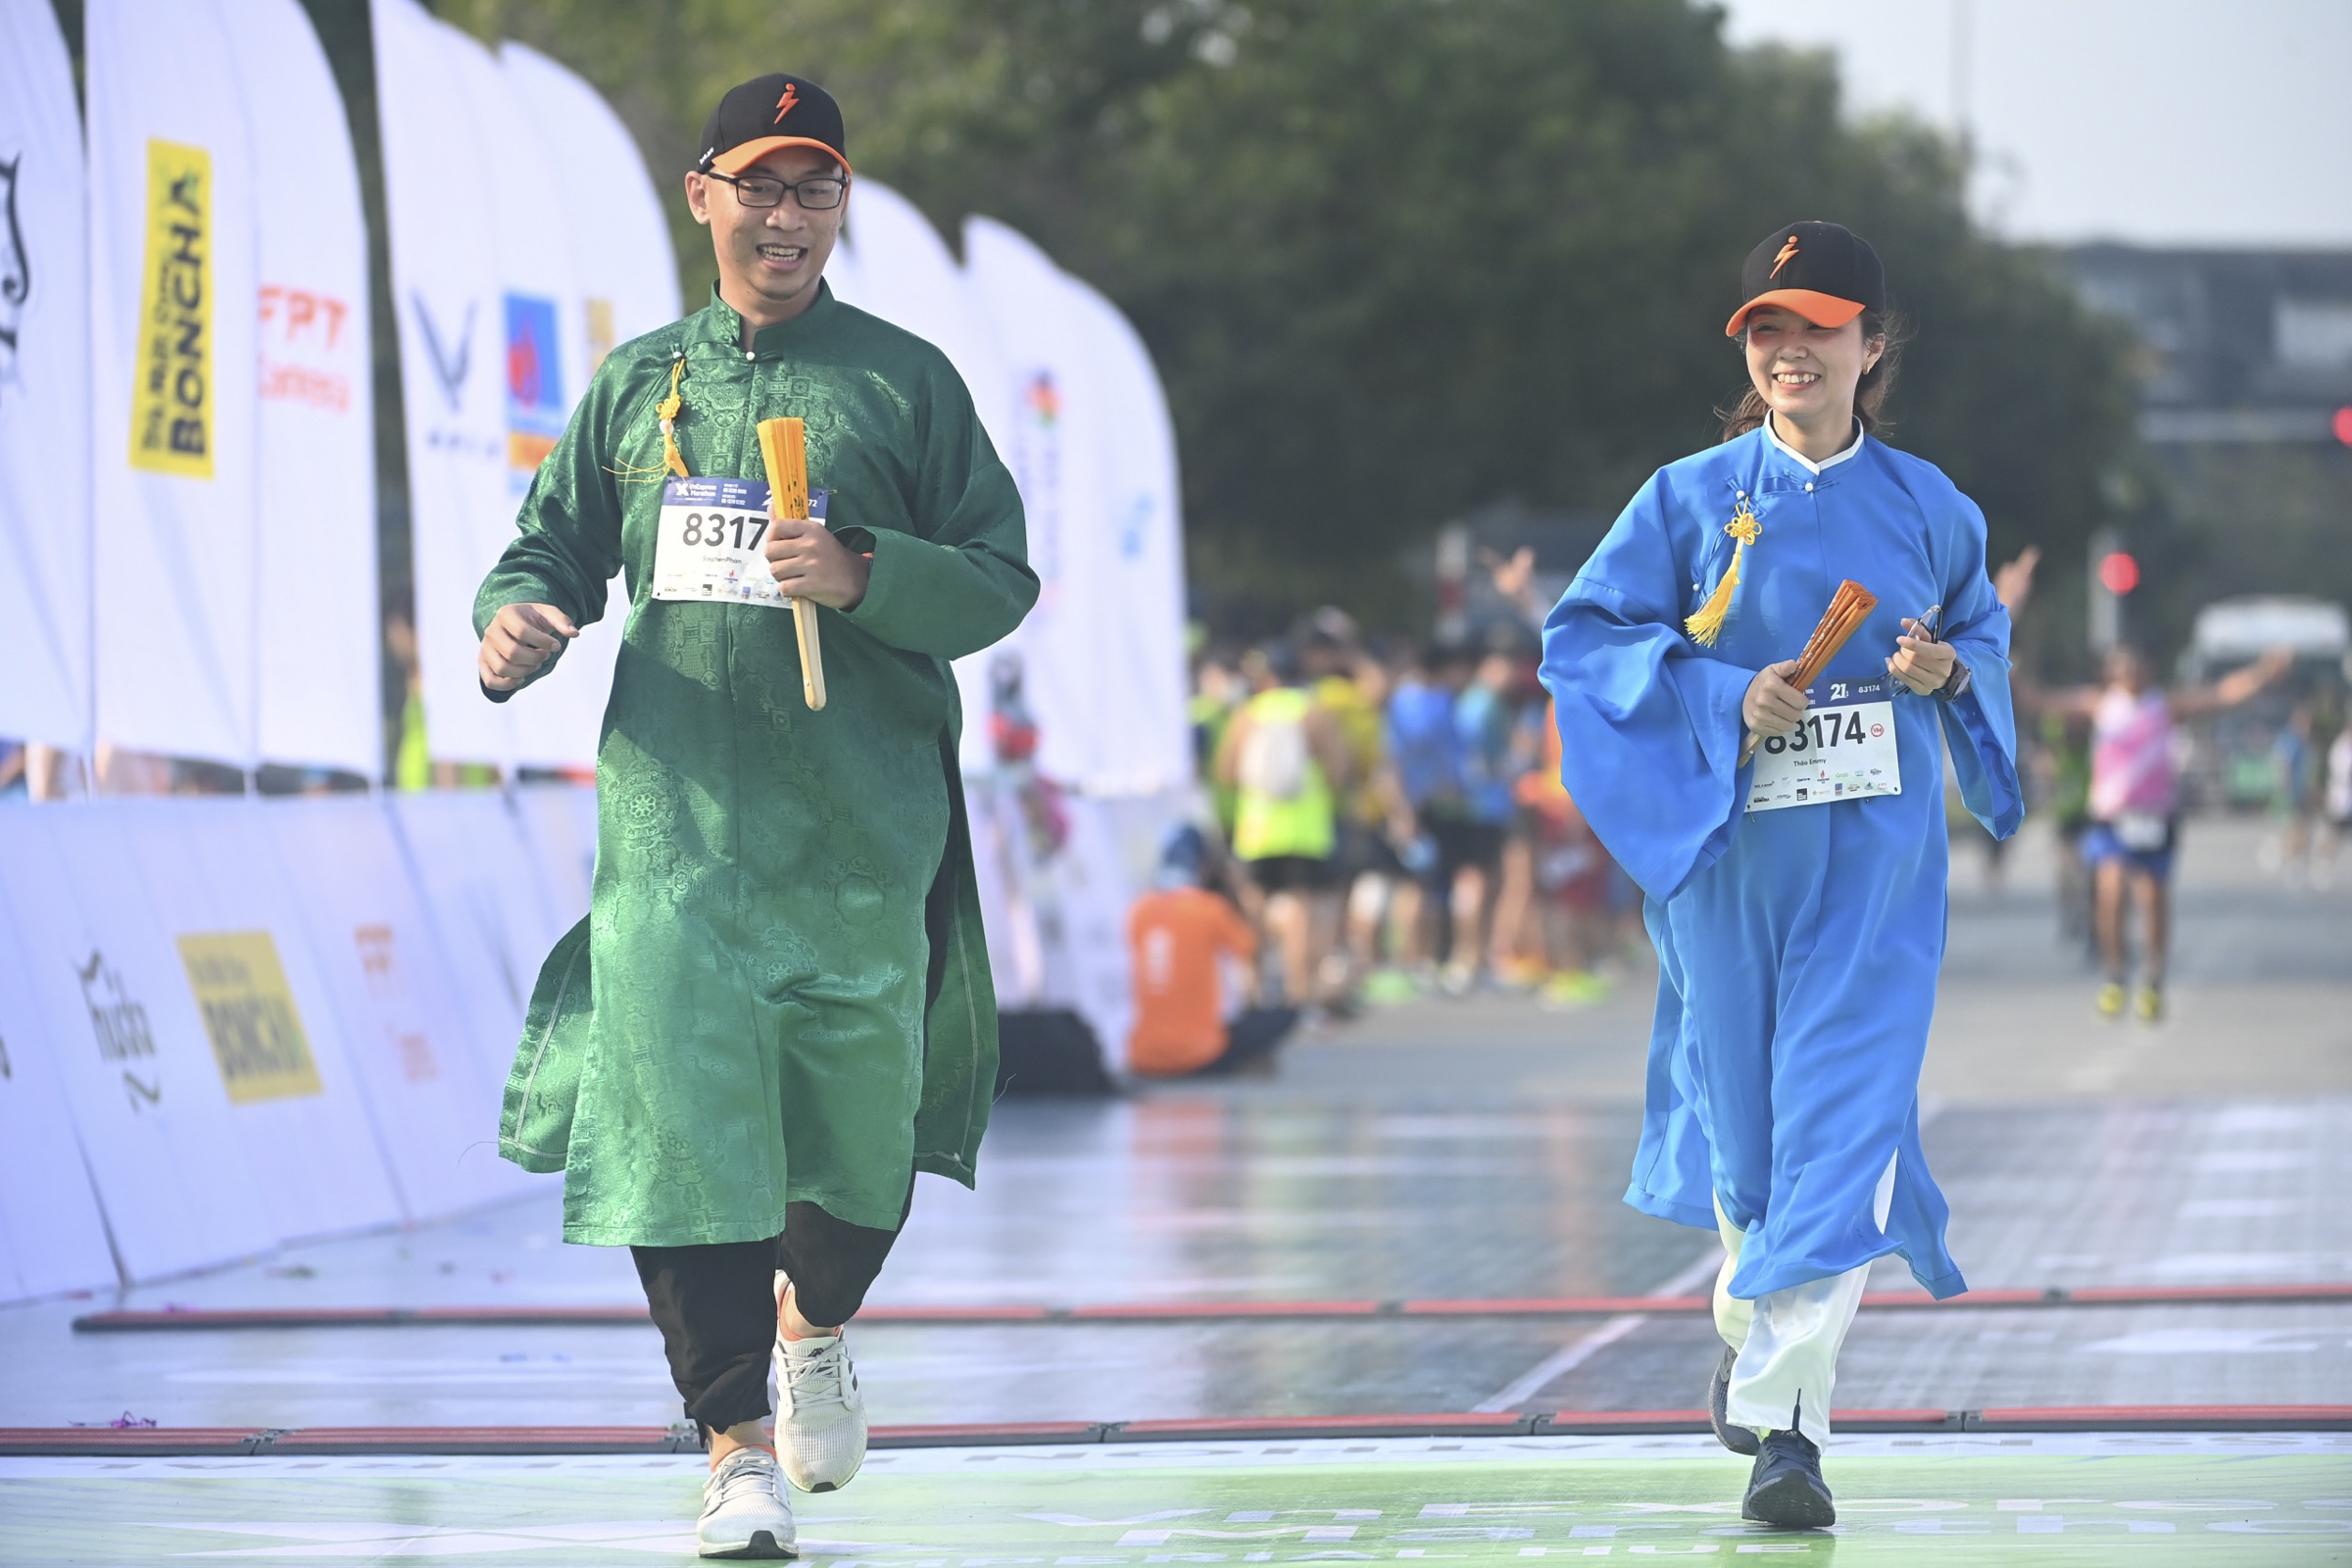 A couple wore the traditional Vietnamese traditional costume ao dai for their marathon run.